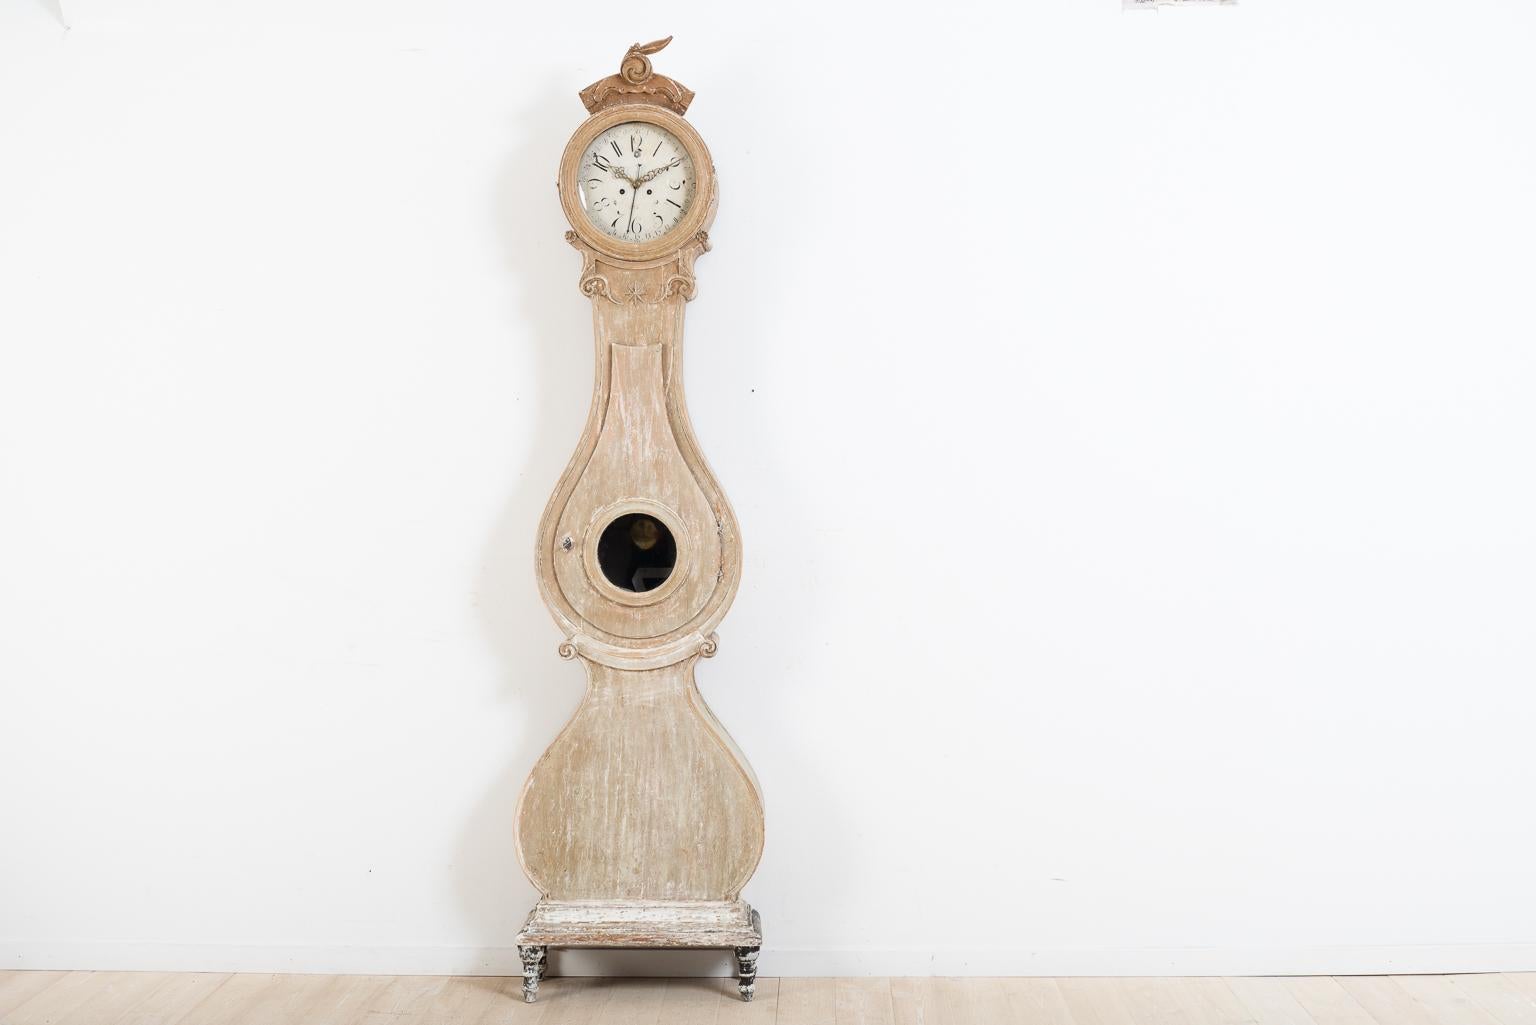 Hand-Crafted Late 18th Century Swedish Rococo Long Case Clock from Fryksdalen